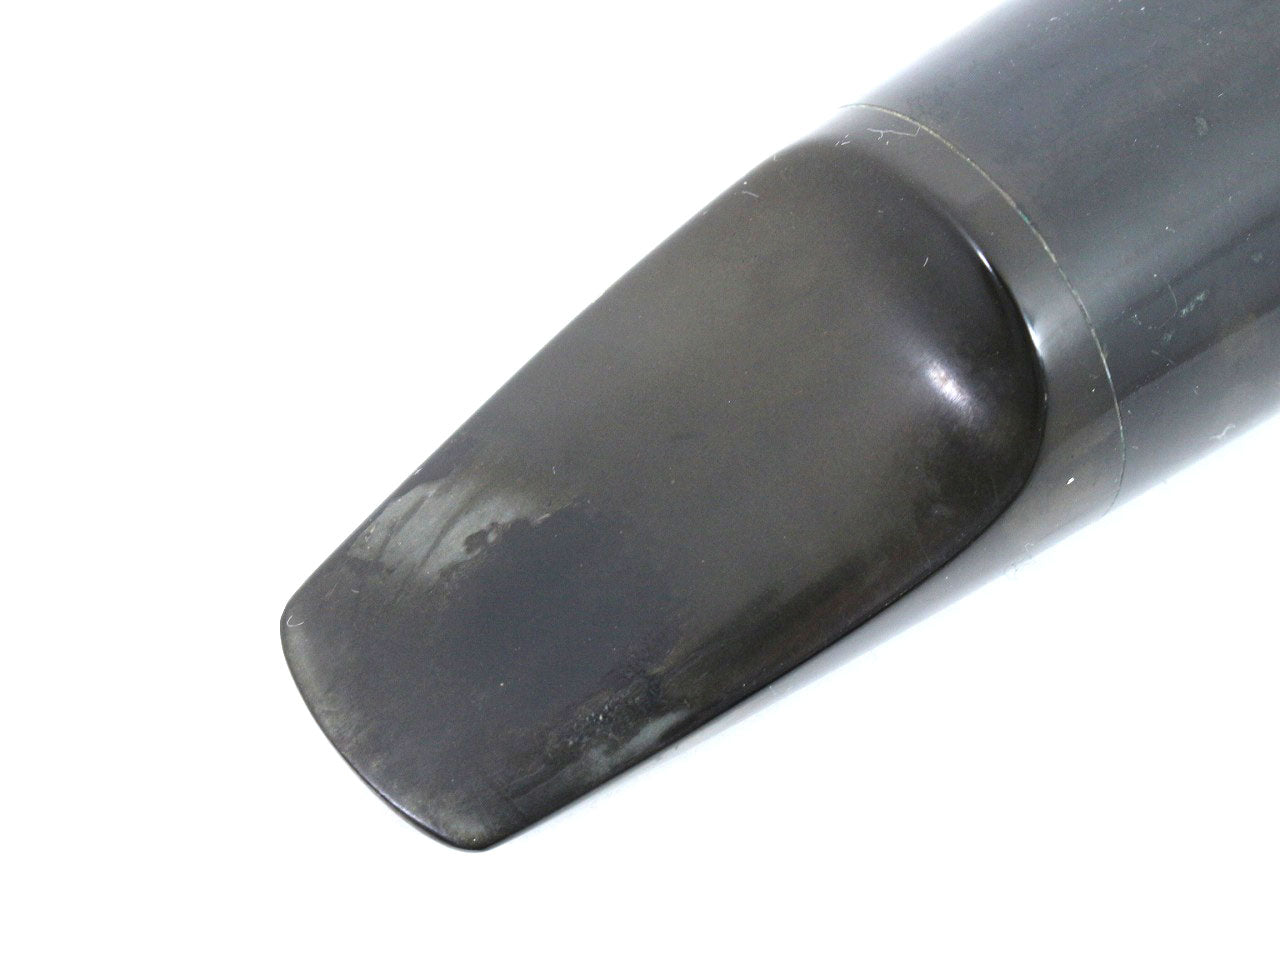 USED MEYER mouthpiece for alto saxophone 5MM [20]